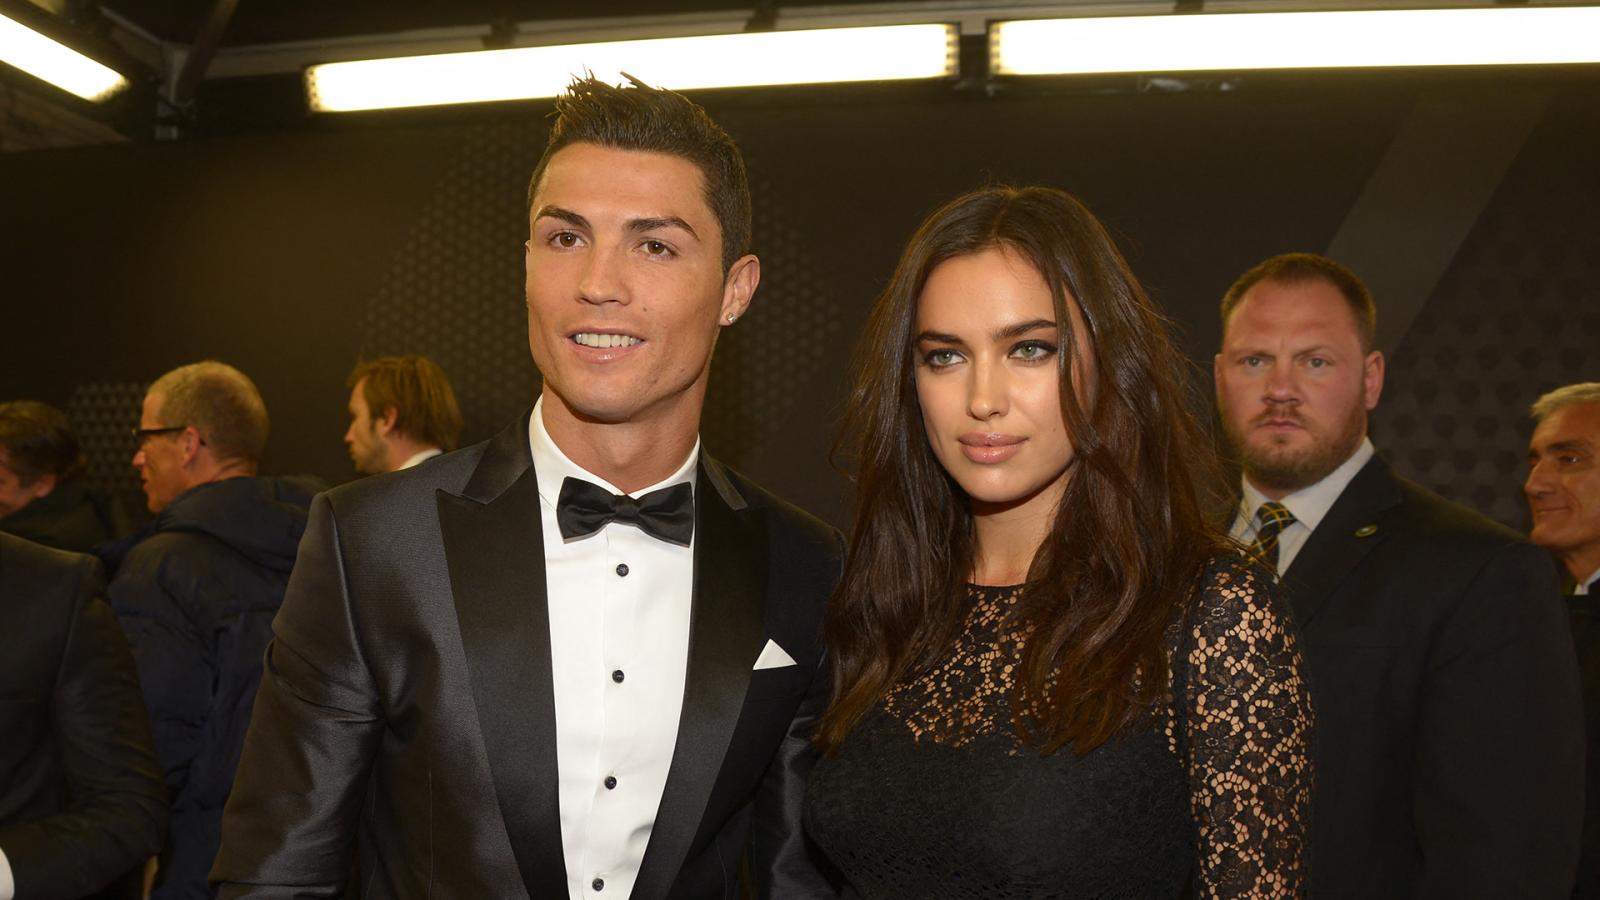 Ladies in Love: Cristiano Ronaldo's Most Talked-About Relationships - image 4